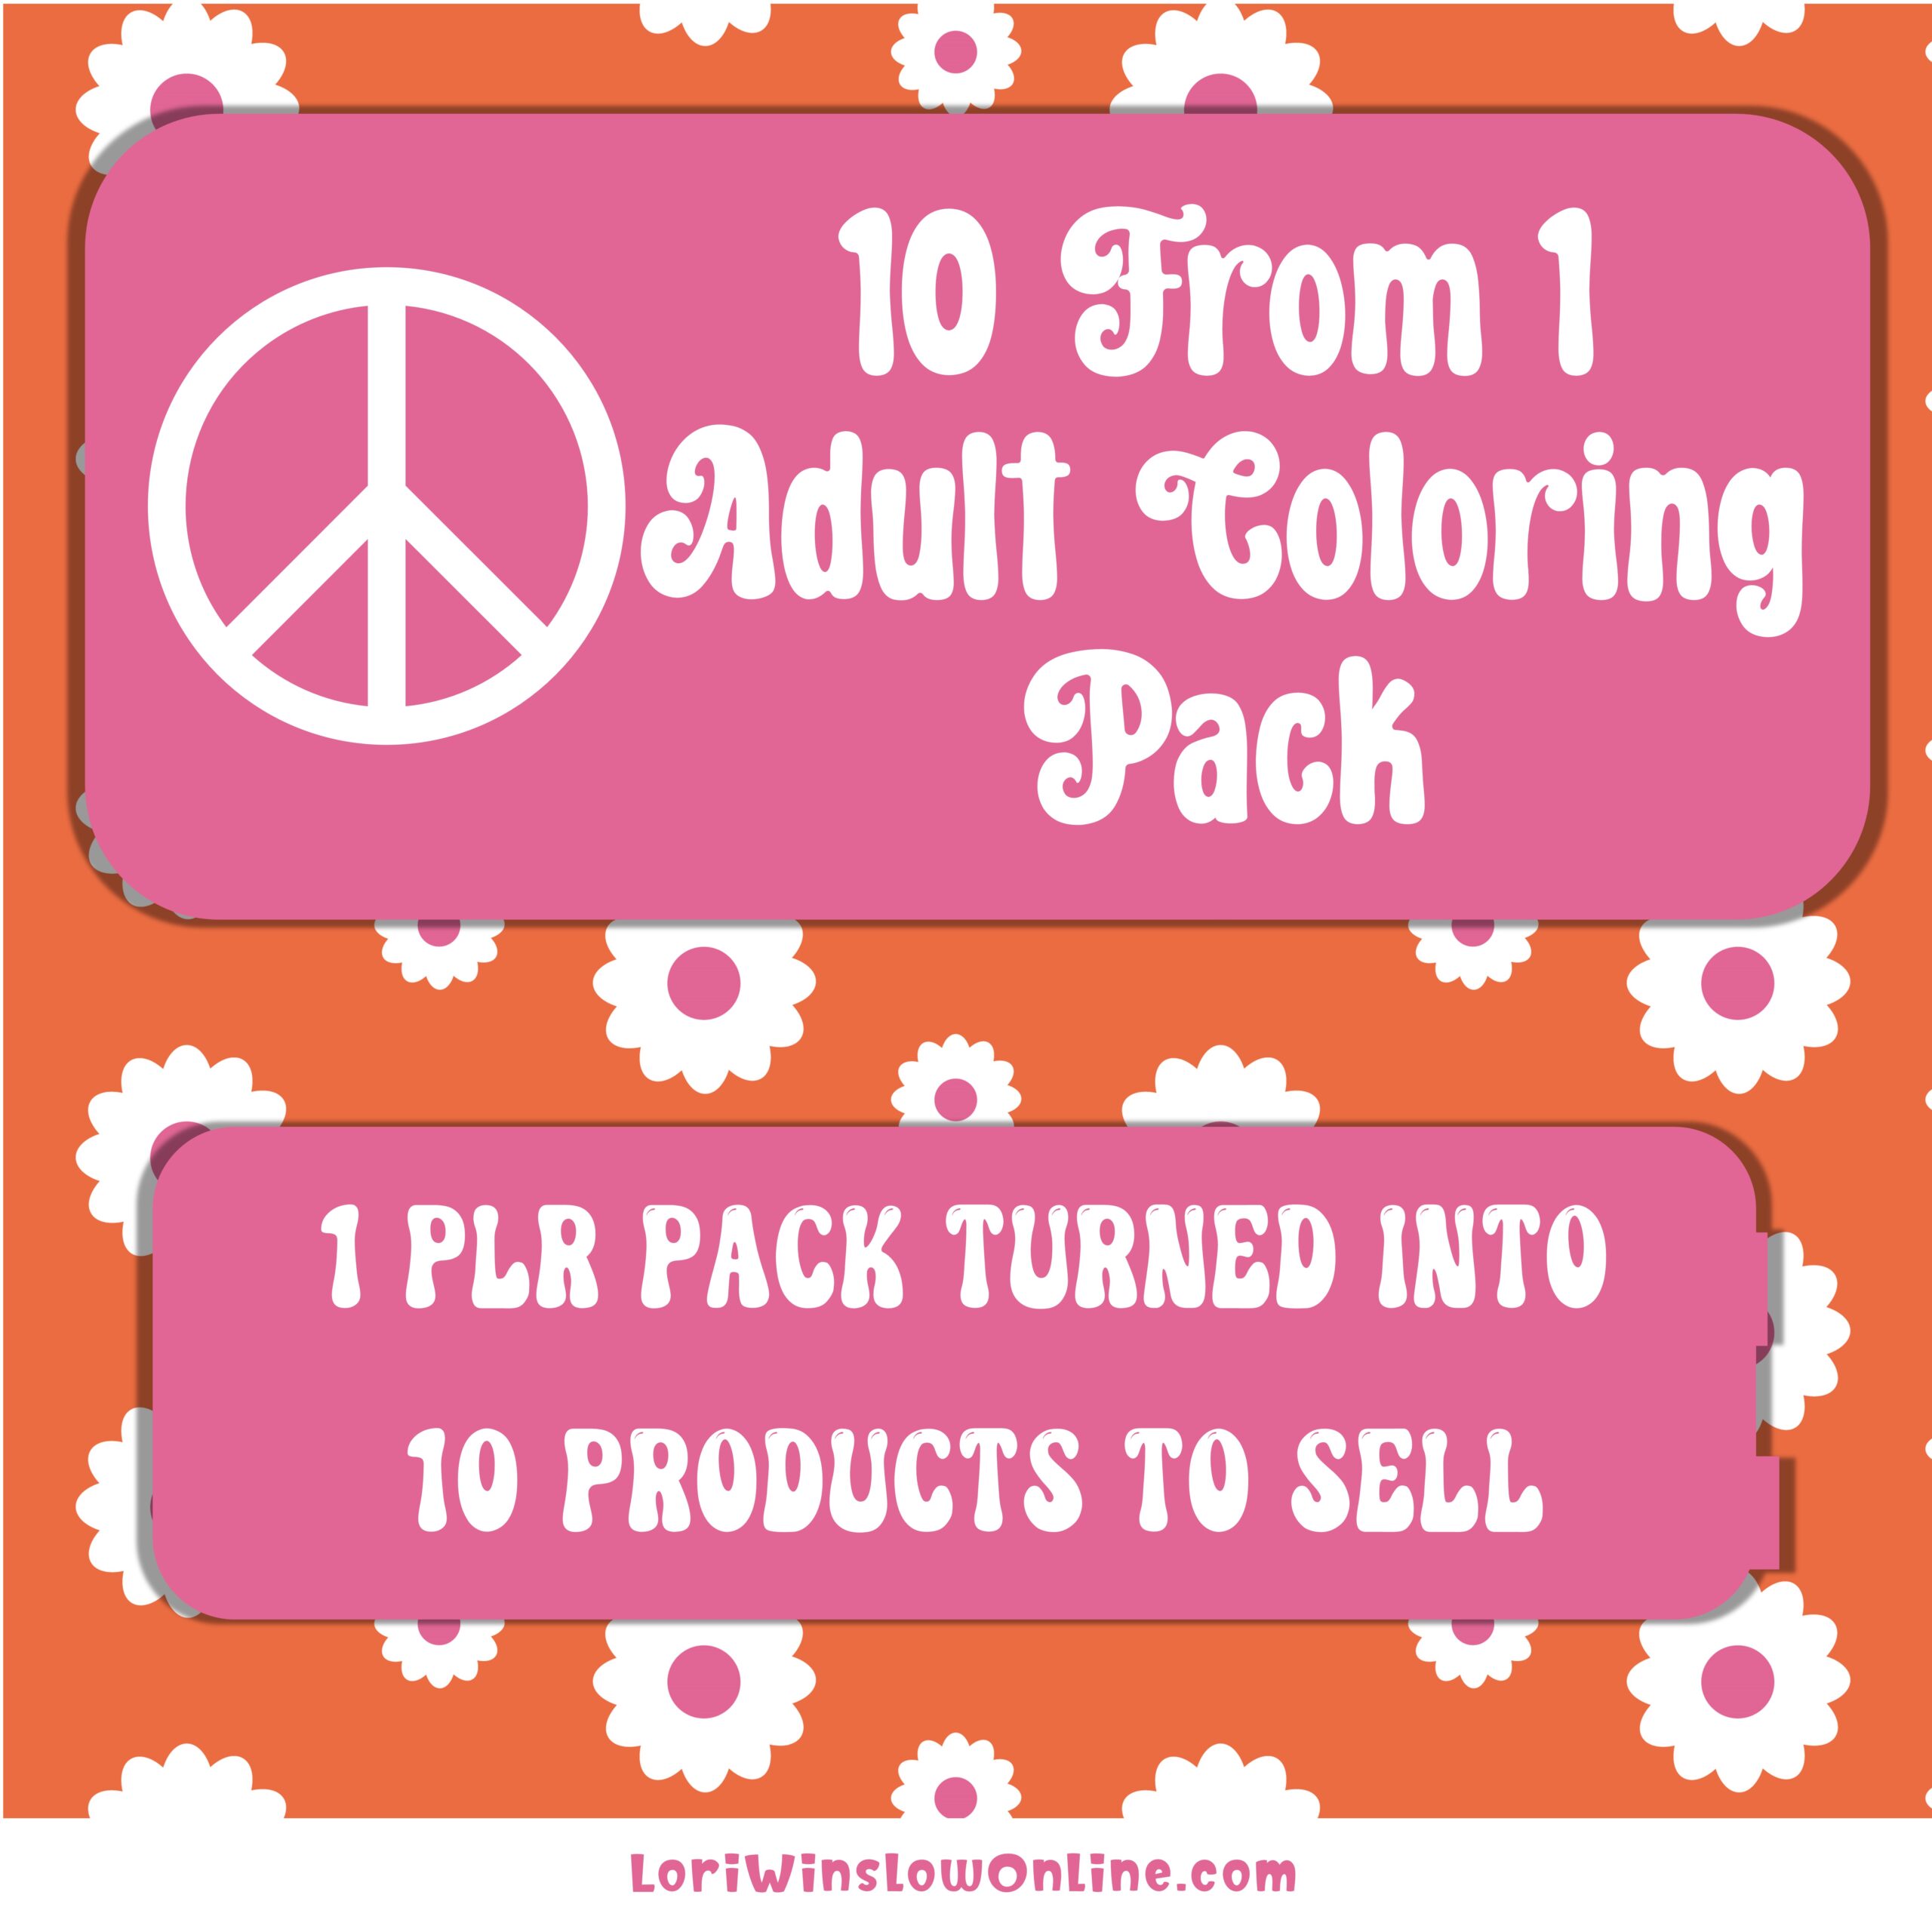 10-From-1 Coloring Pack for Adults - Lori Winslow